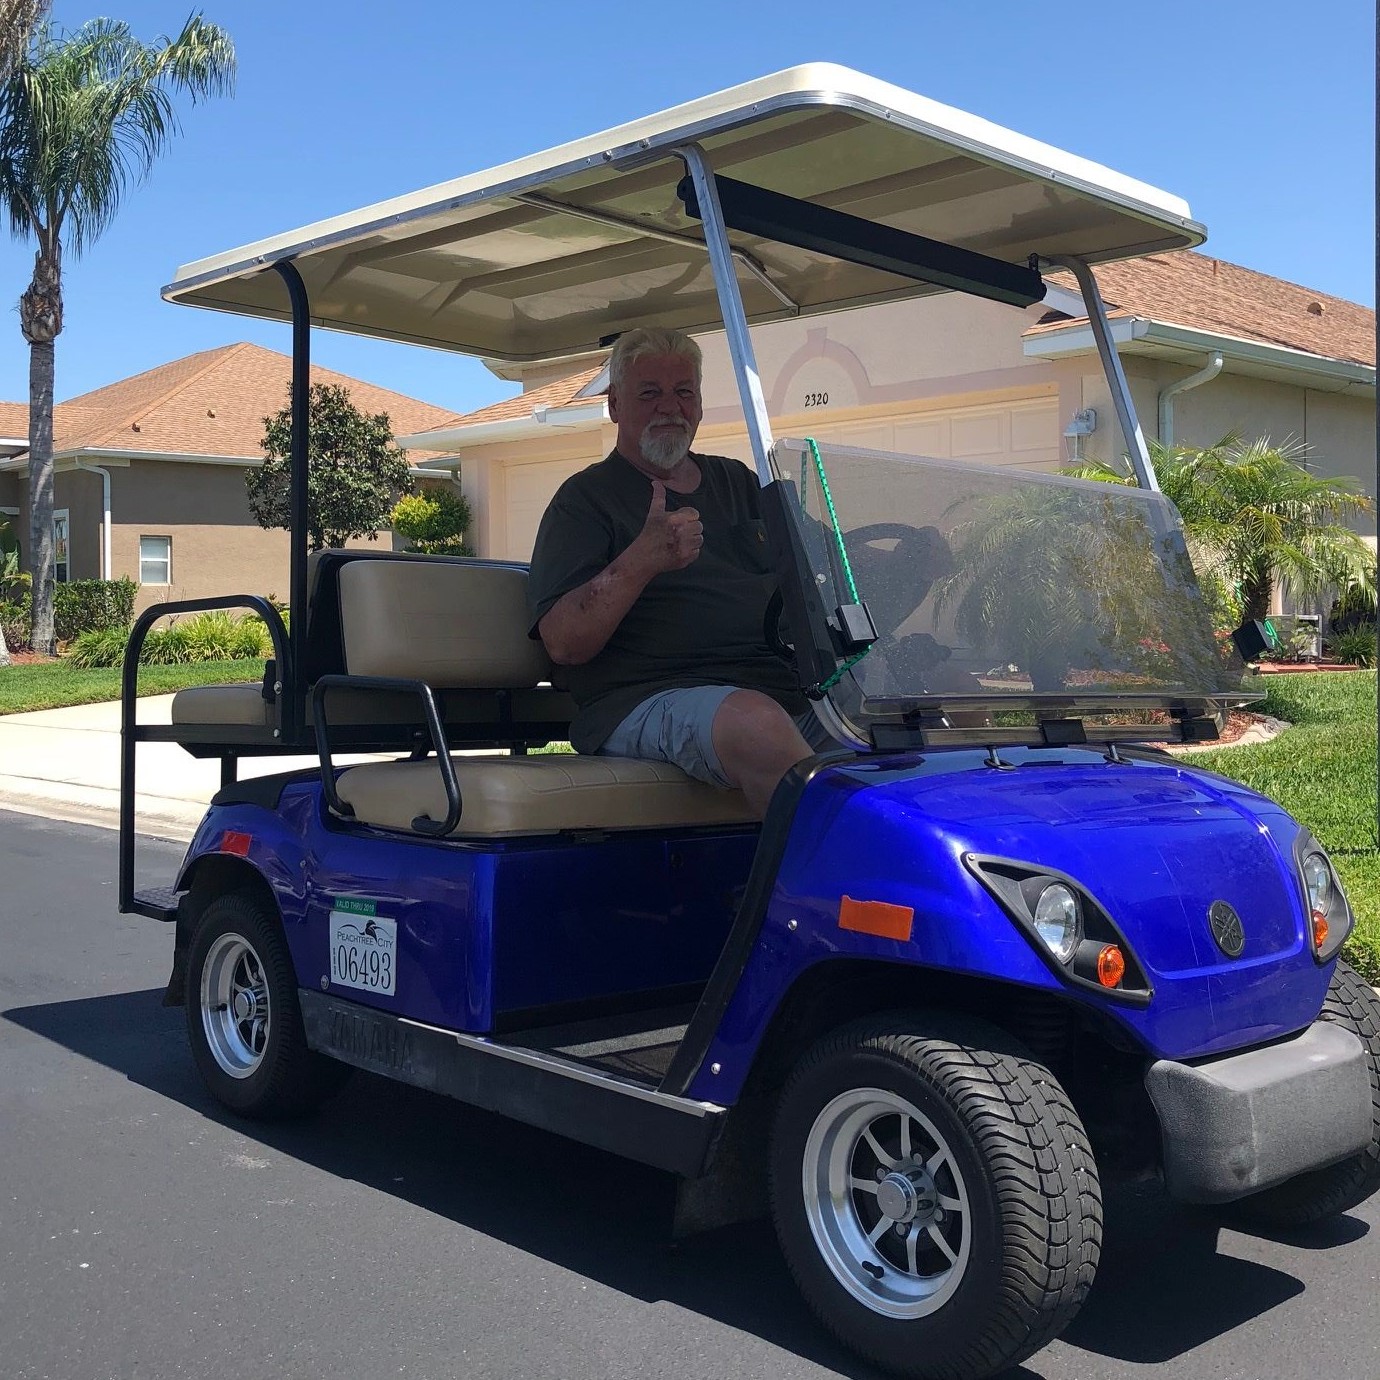 Used Golf Carts For Sale | Cart Parts | Big O's Gold Carts